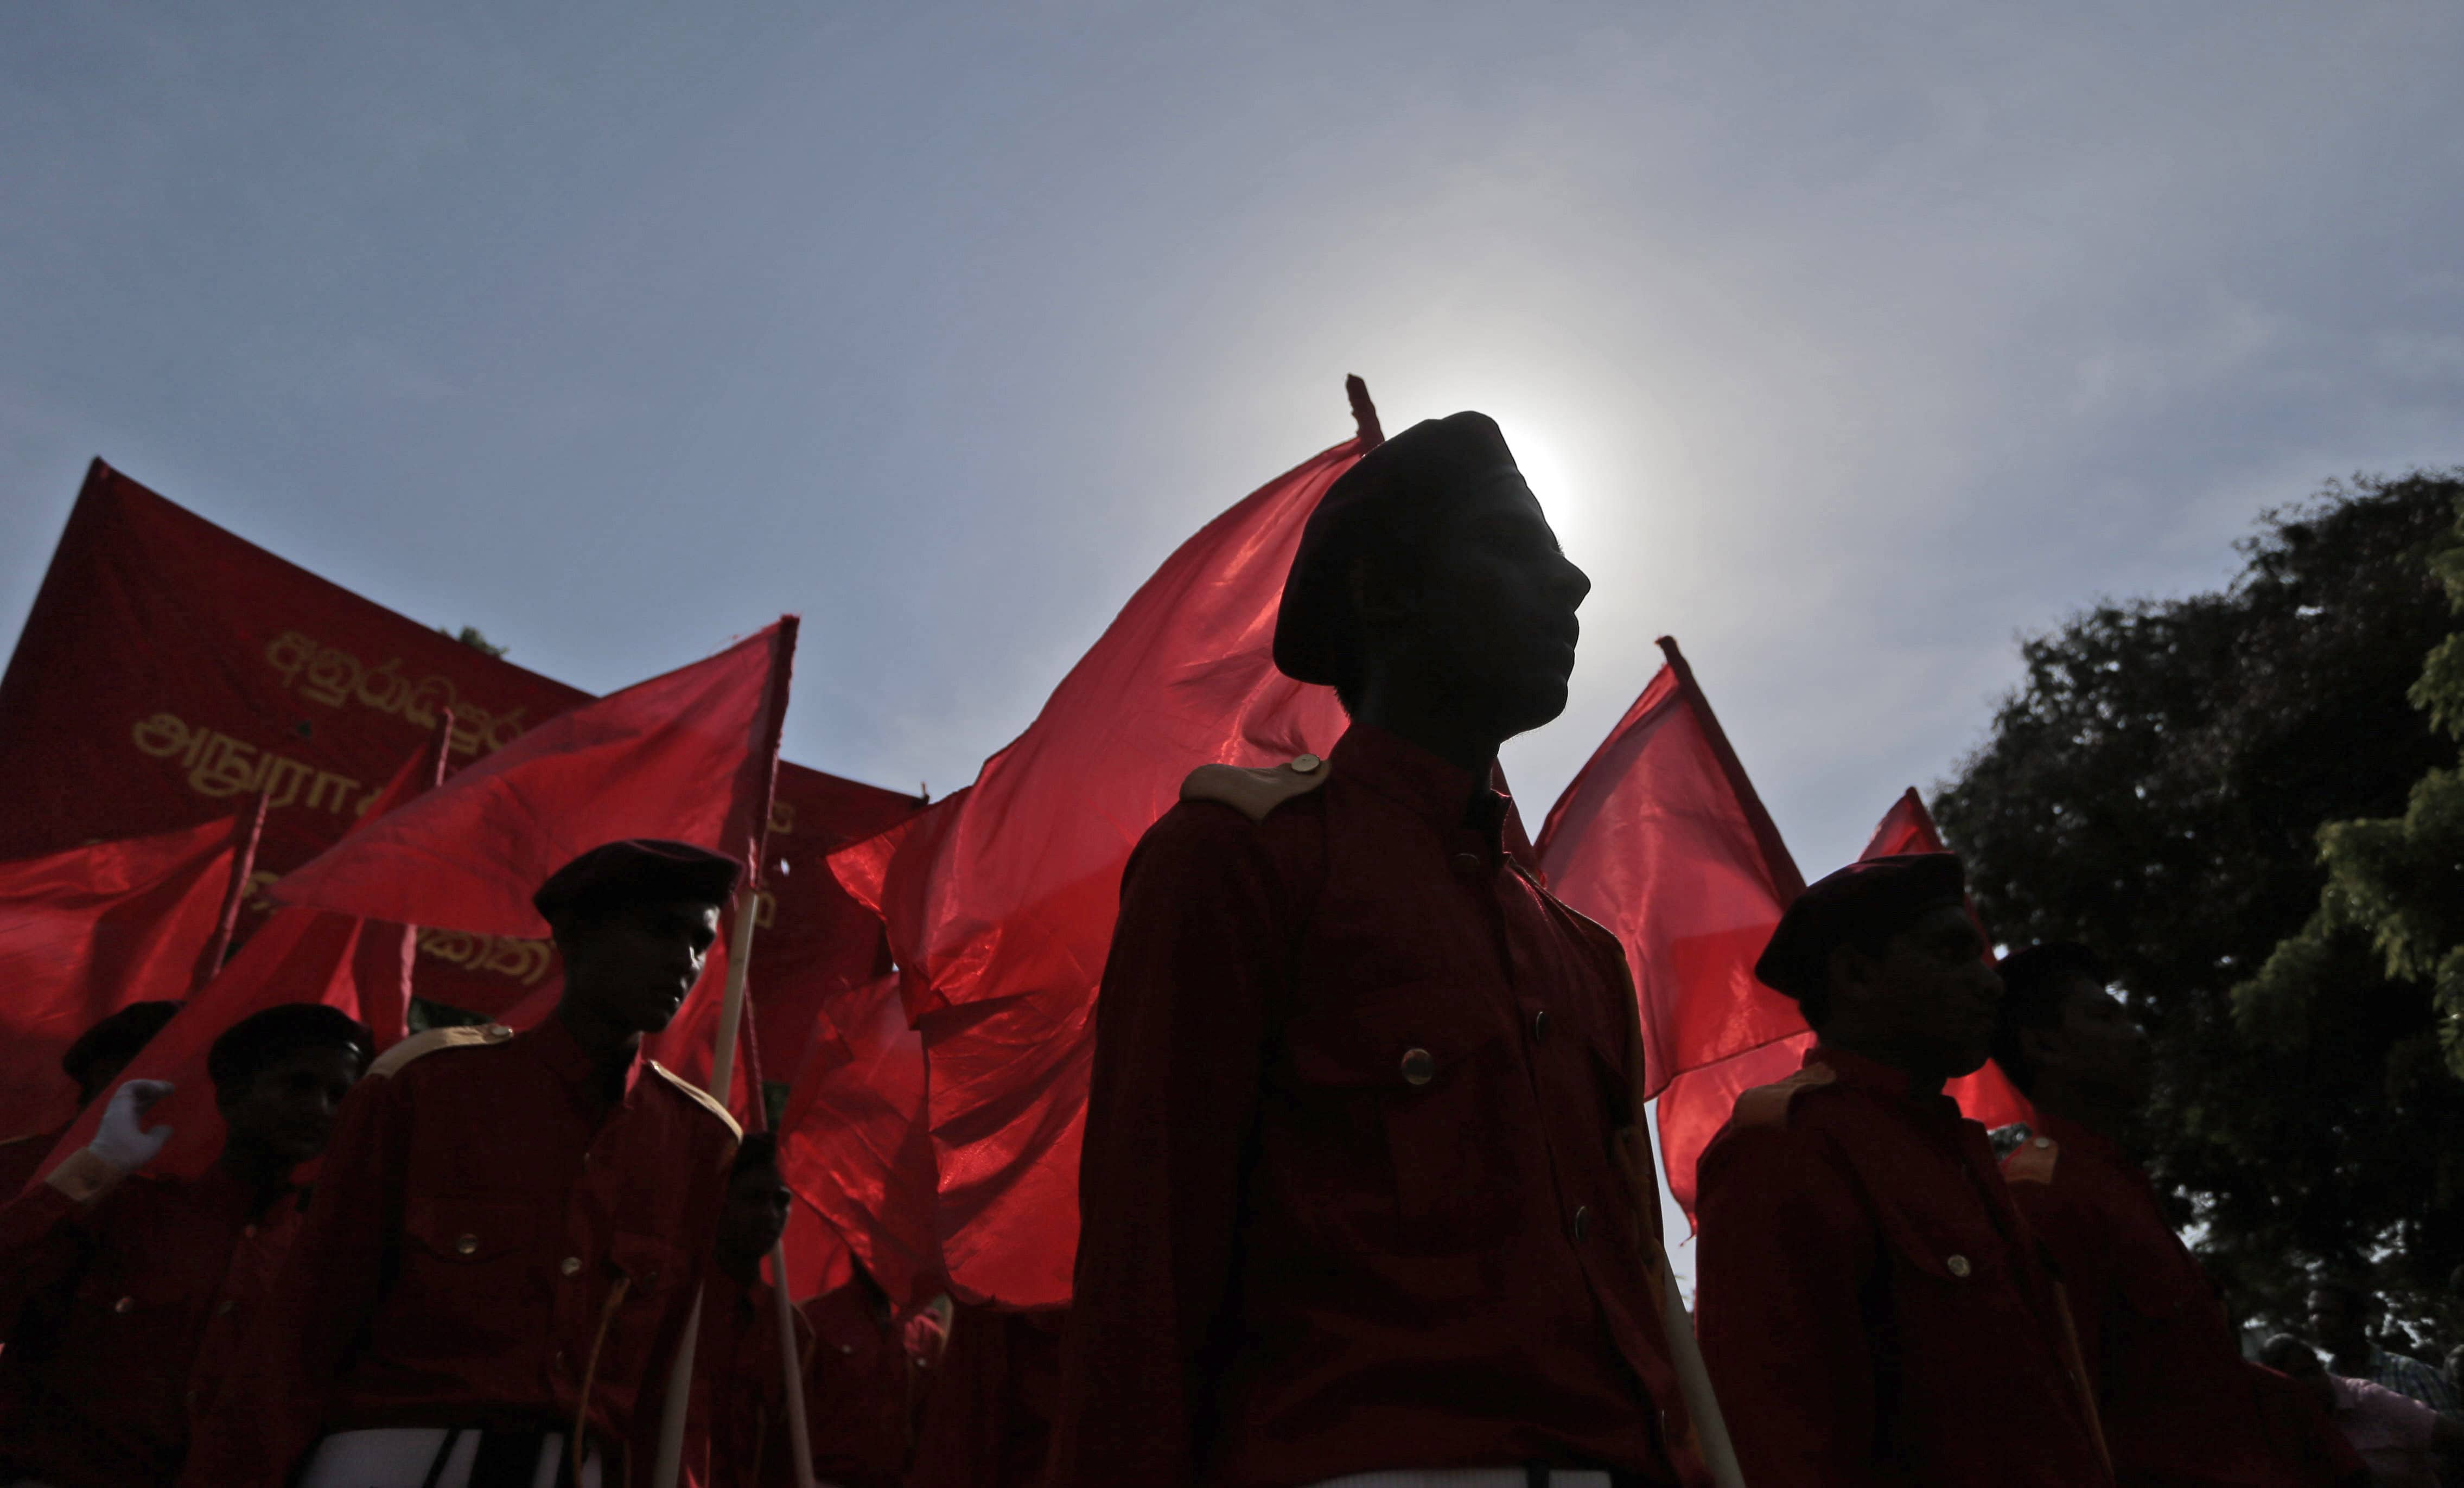 Activists of the Sri Lankan Marxist political party Peoples' Liberation Front march during a rally to mark International Labor Day in Colombo, Sri Lanka, 1 May 2015, AP Photo/Eranga Jayawardena